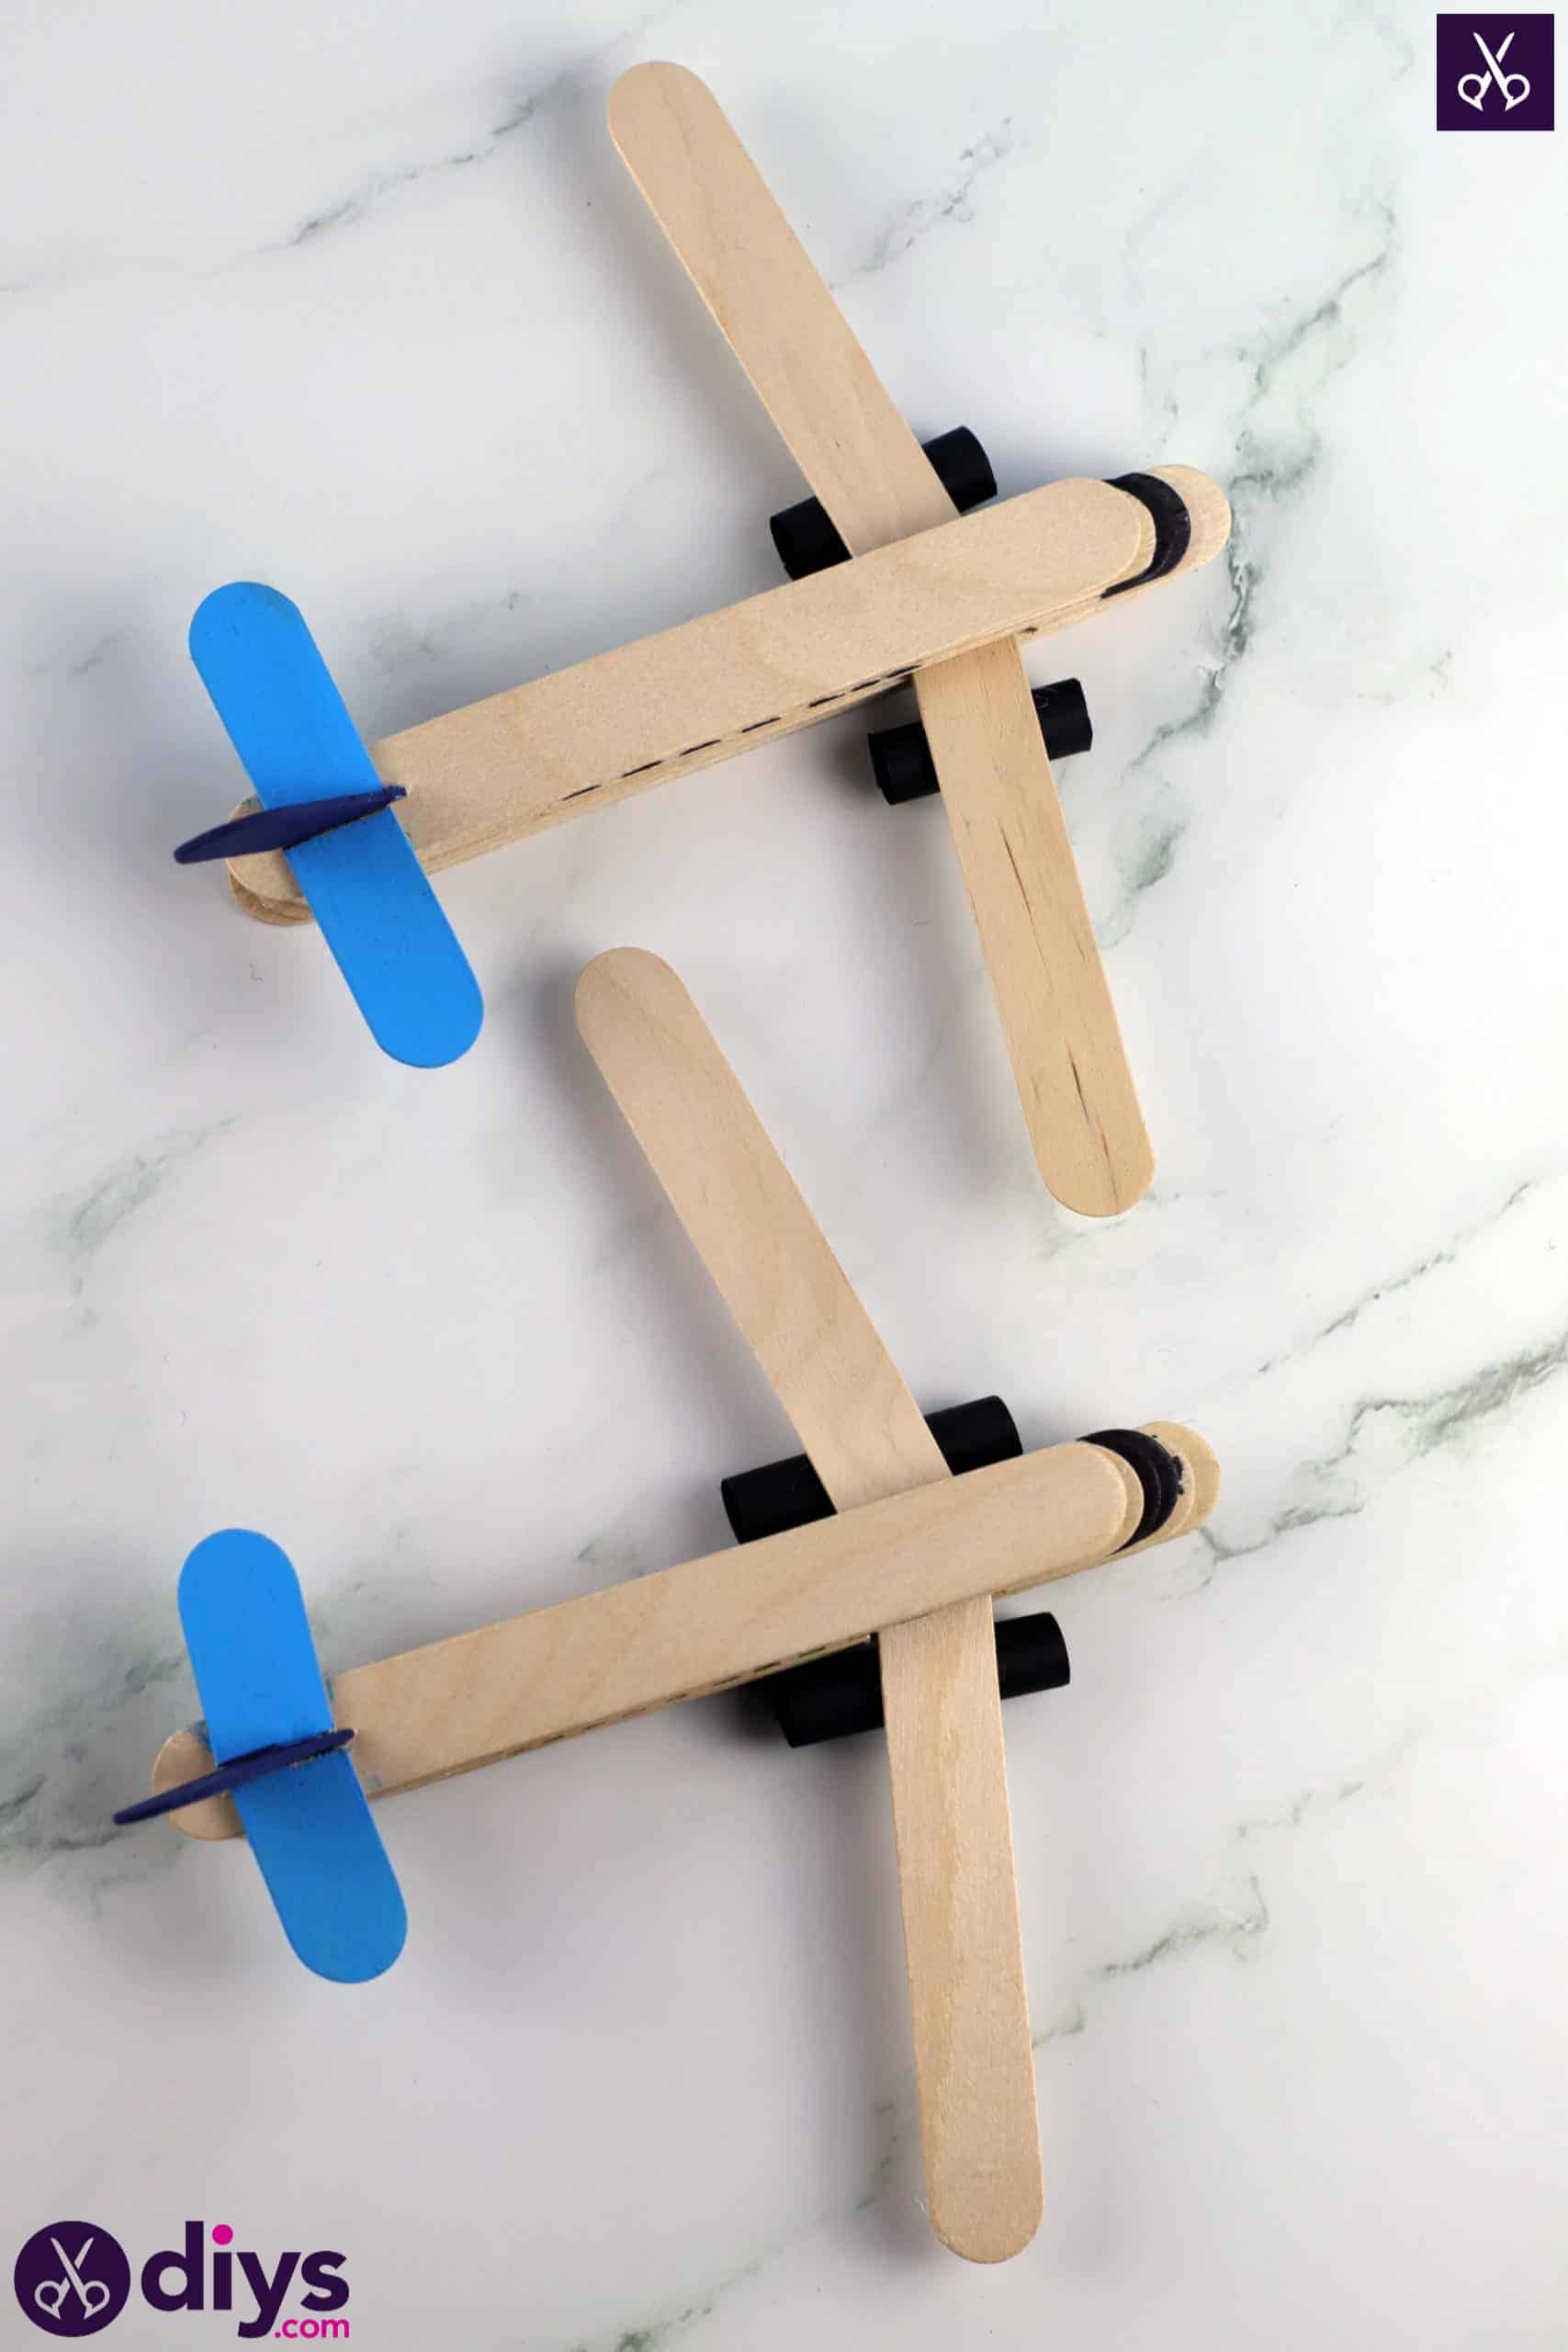 Popsicle stick airplane for kids